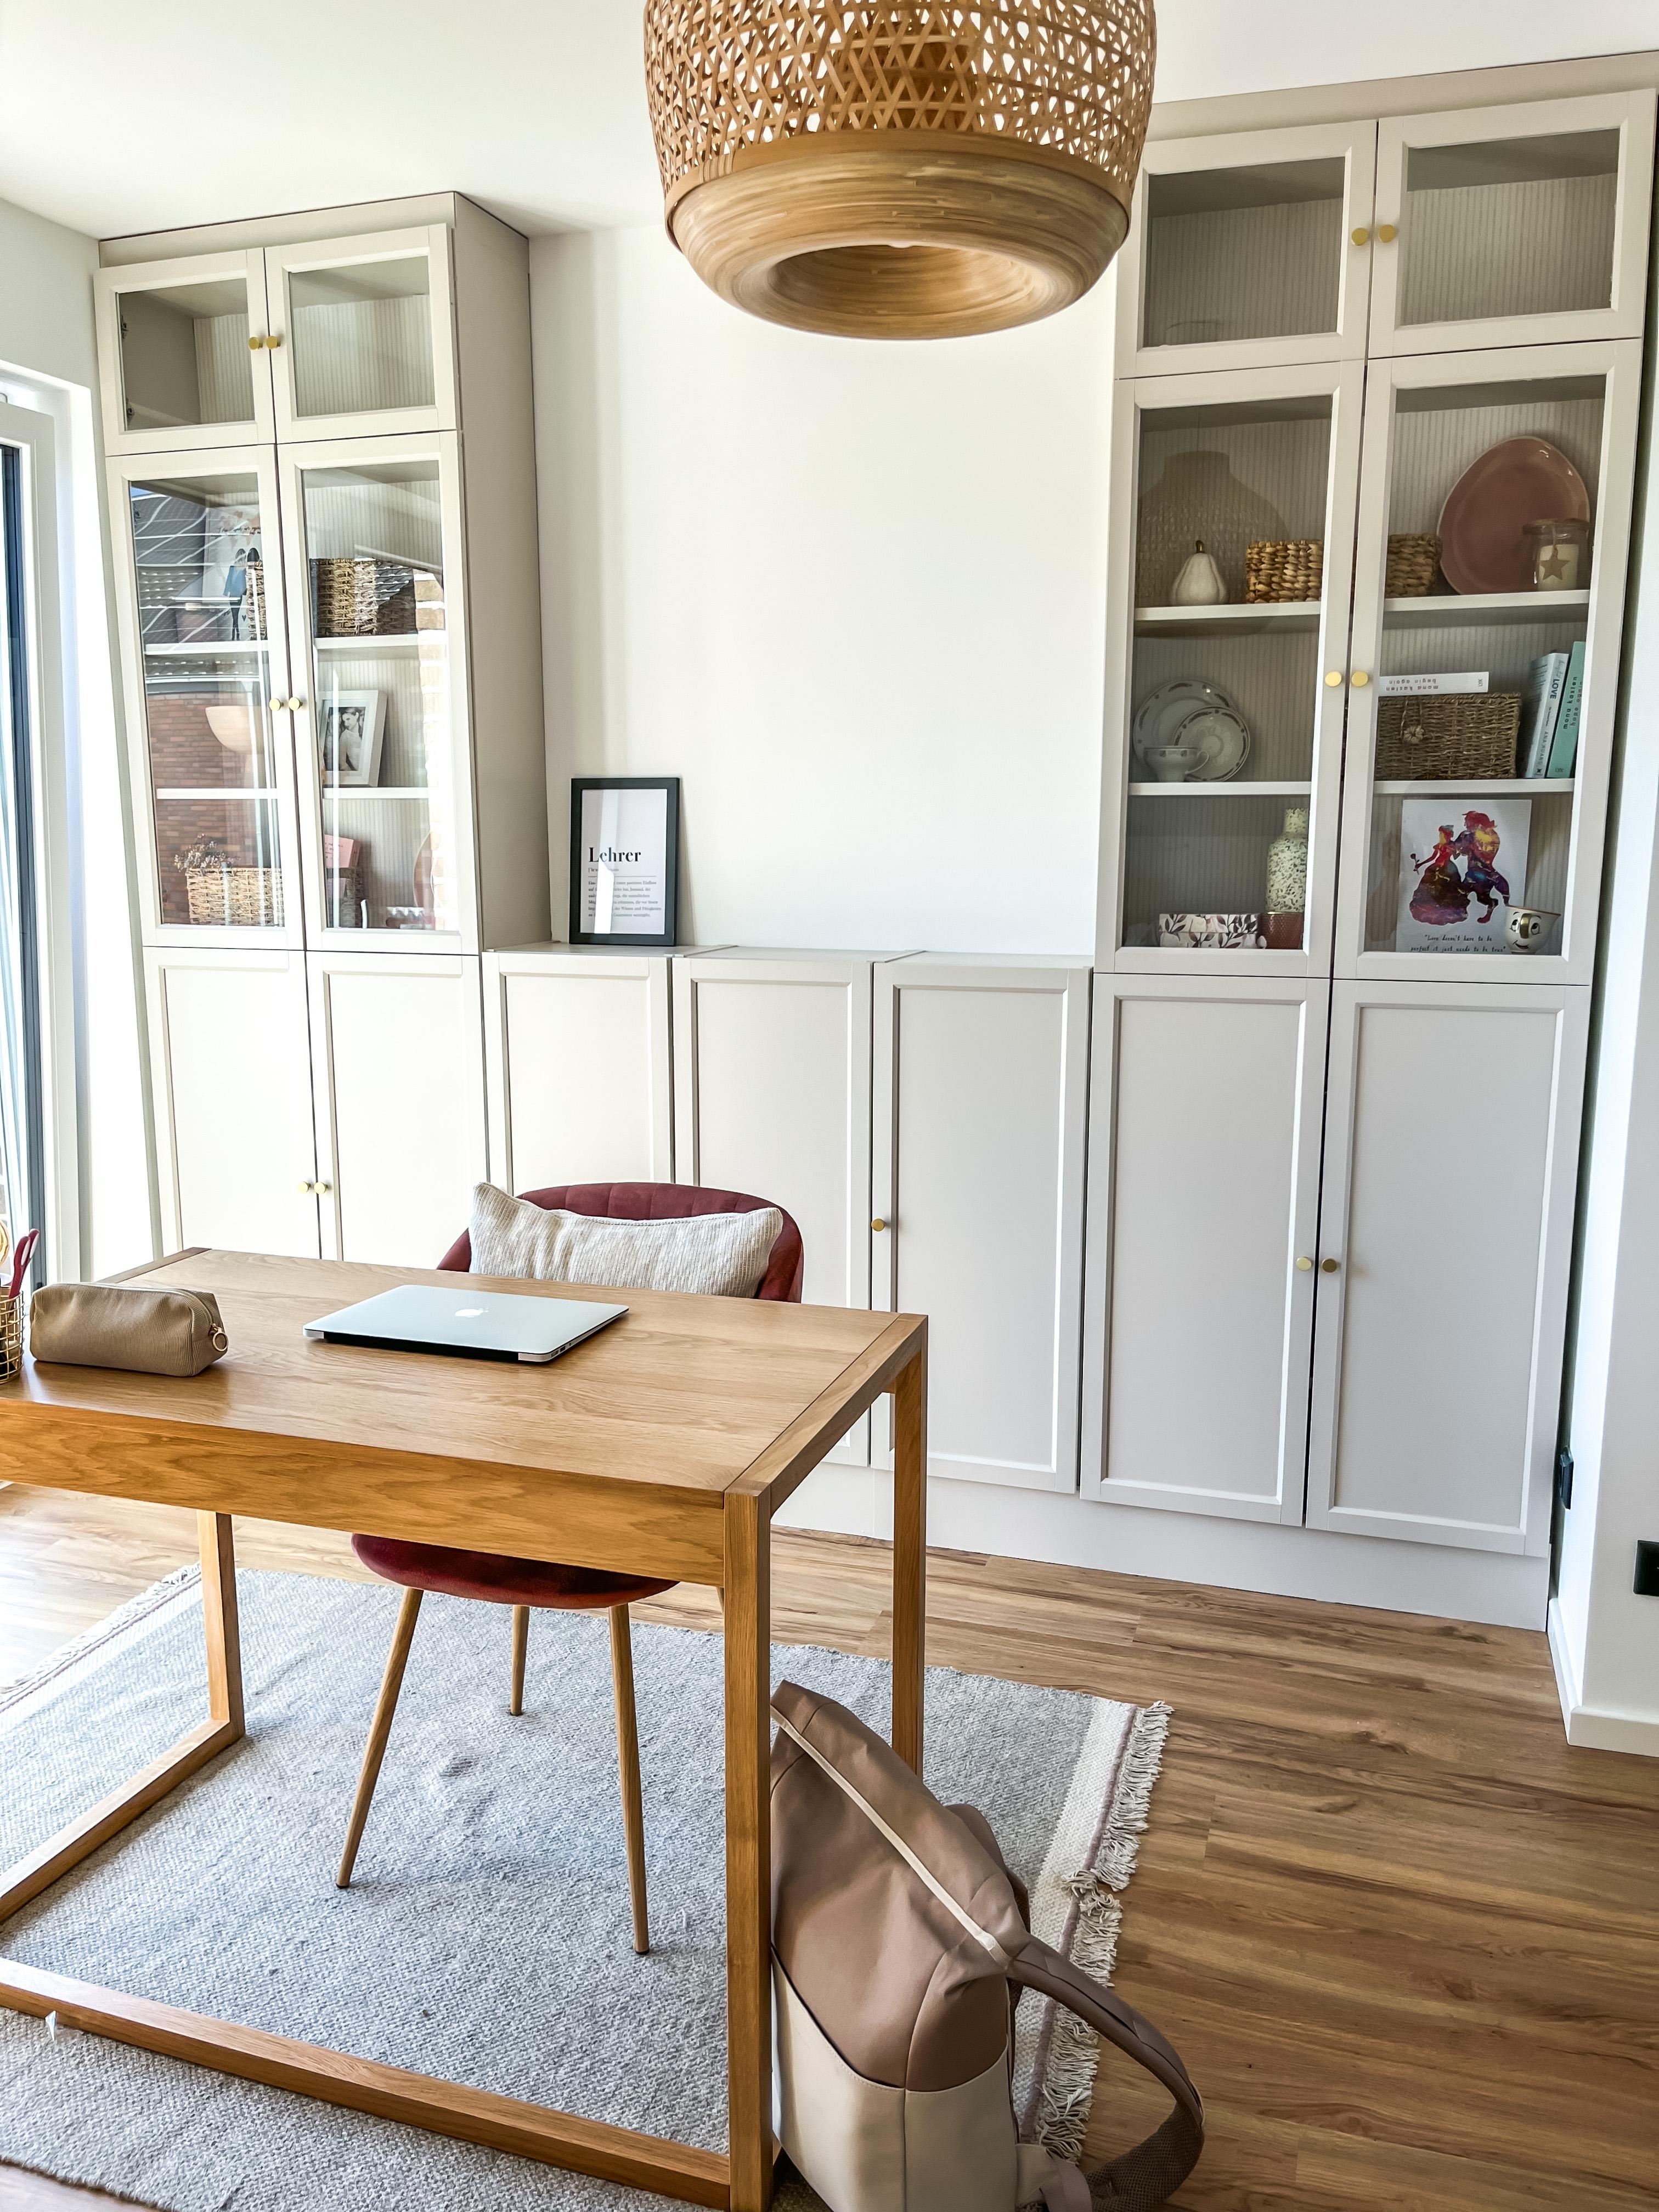 Home Office Makeover
#homeoffice #diy #upcycling #ikeahack #ordnungsliebe #makeover #paint #interiordesign #biy #cozy #skandi #modernrustic #greige 